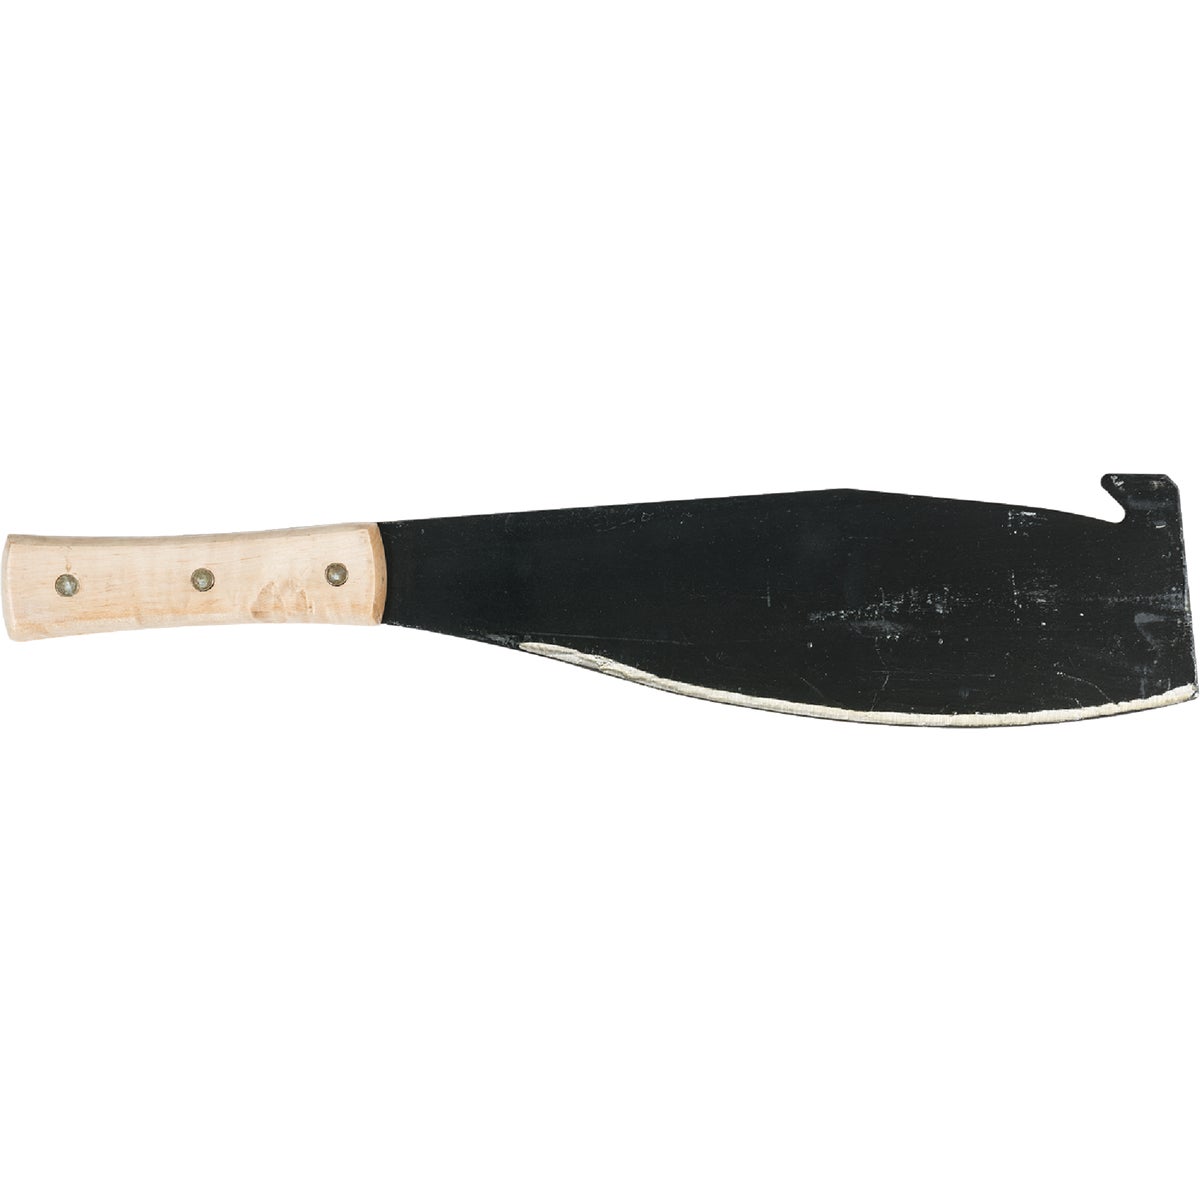 Item 709219, S400 Jobsite Cane Knife has a 13" tempered carbon cutlery steel blade.